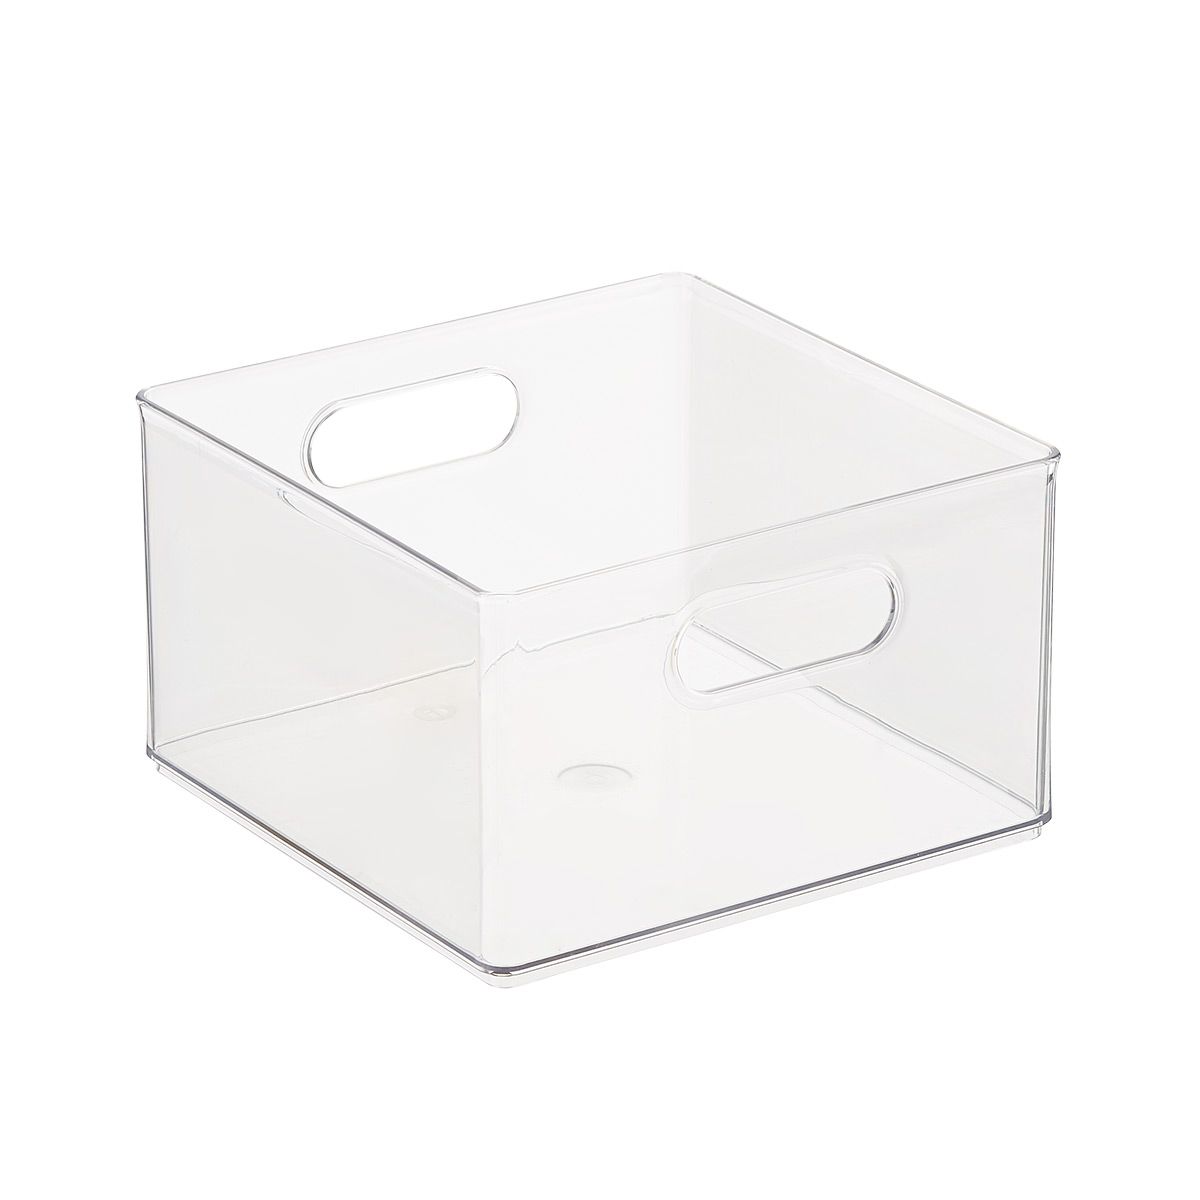 THE HOME EDIT Modular All-Purpose Bin ClearSKU:100770864.8122 Reviews | The Container Store